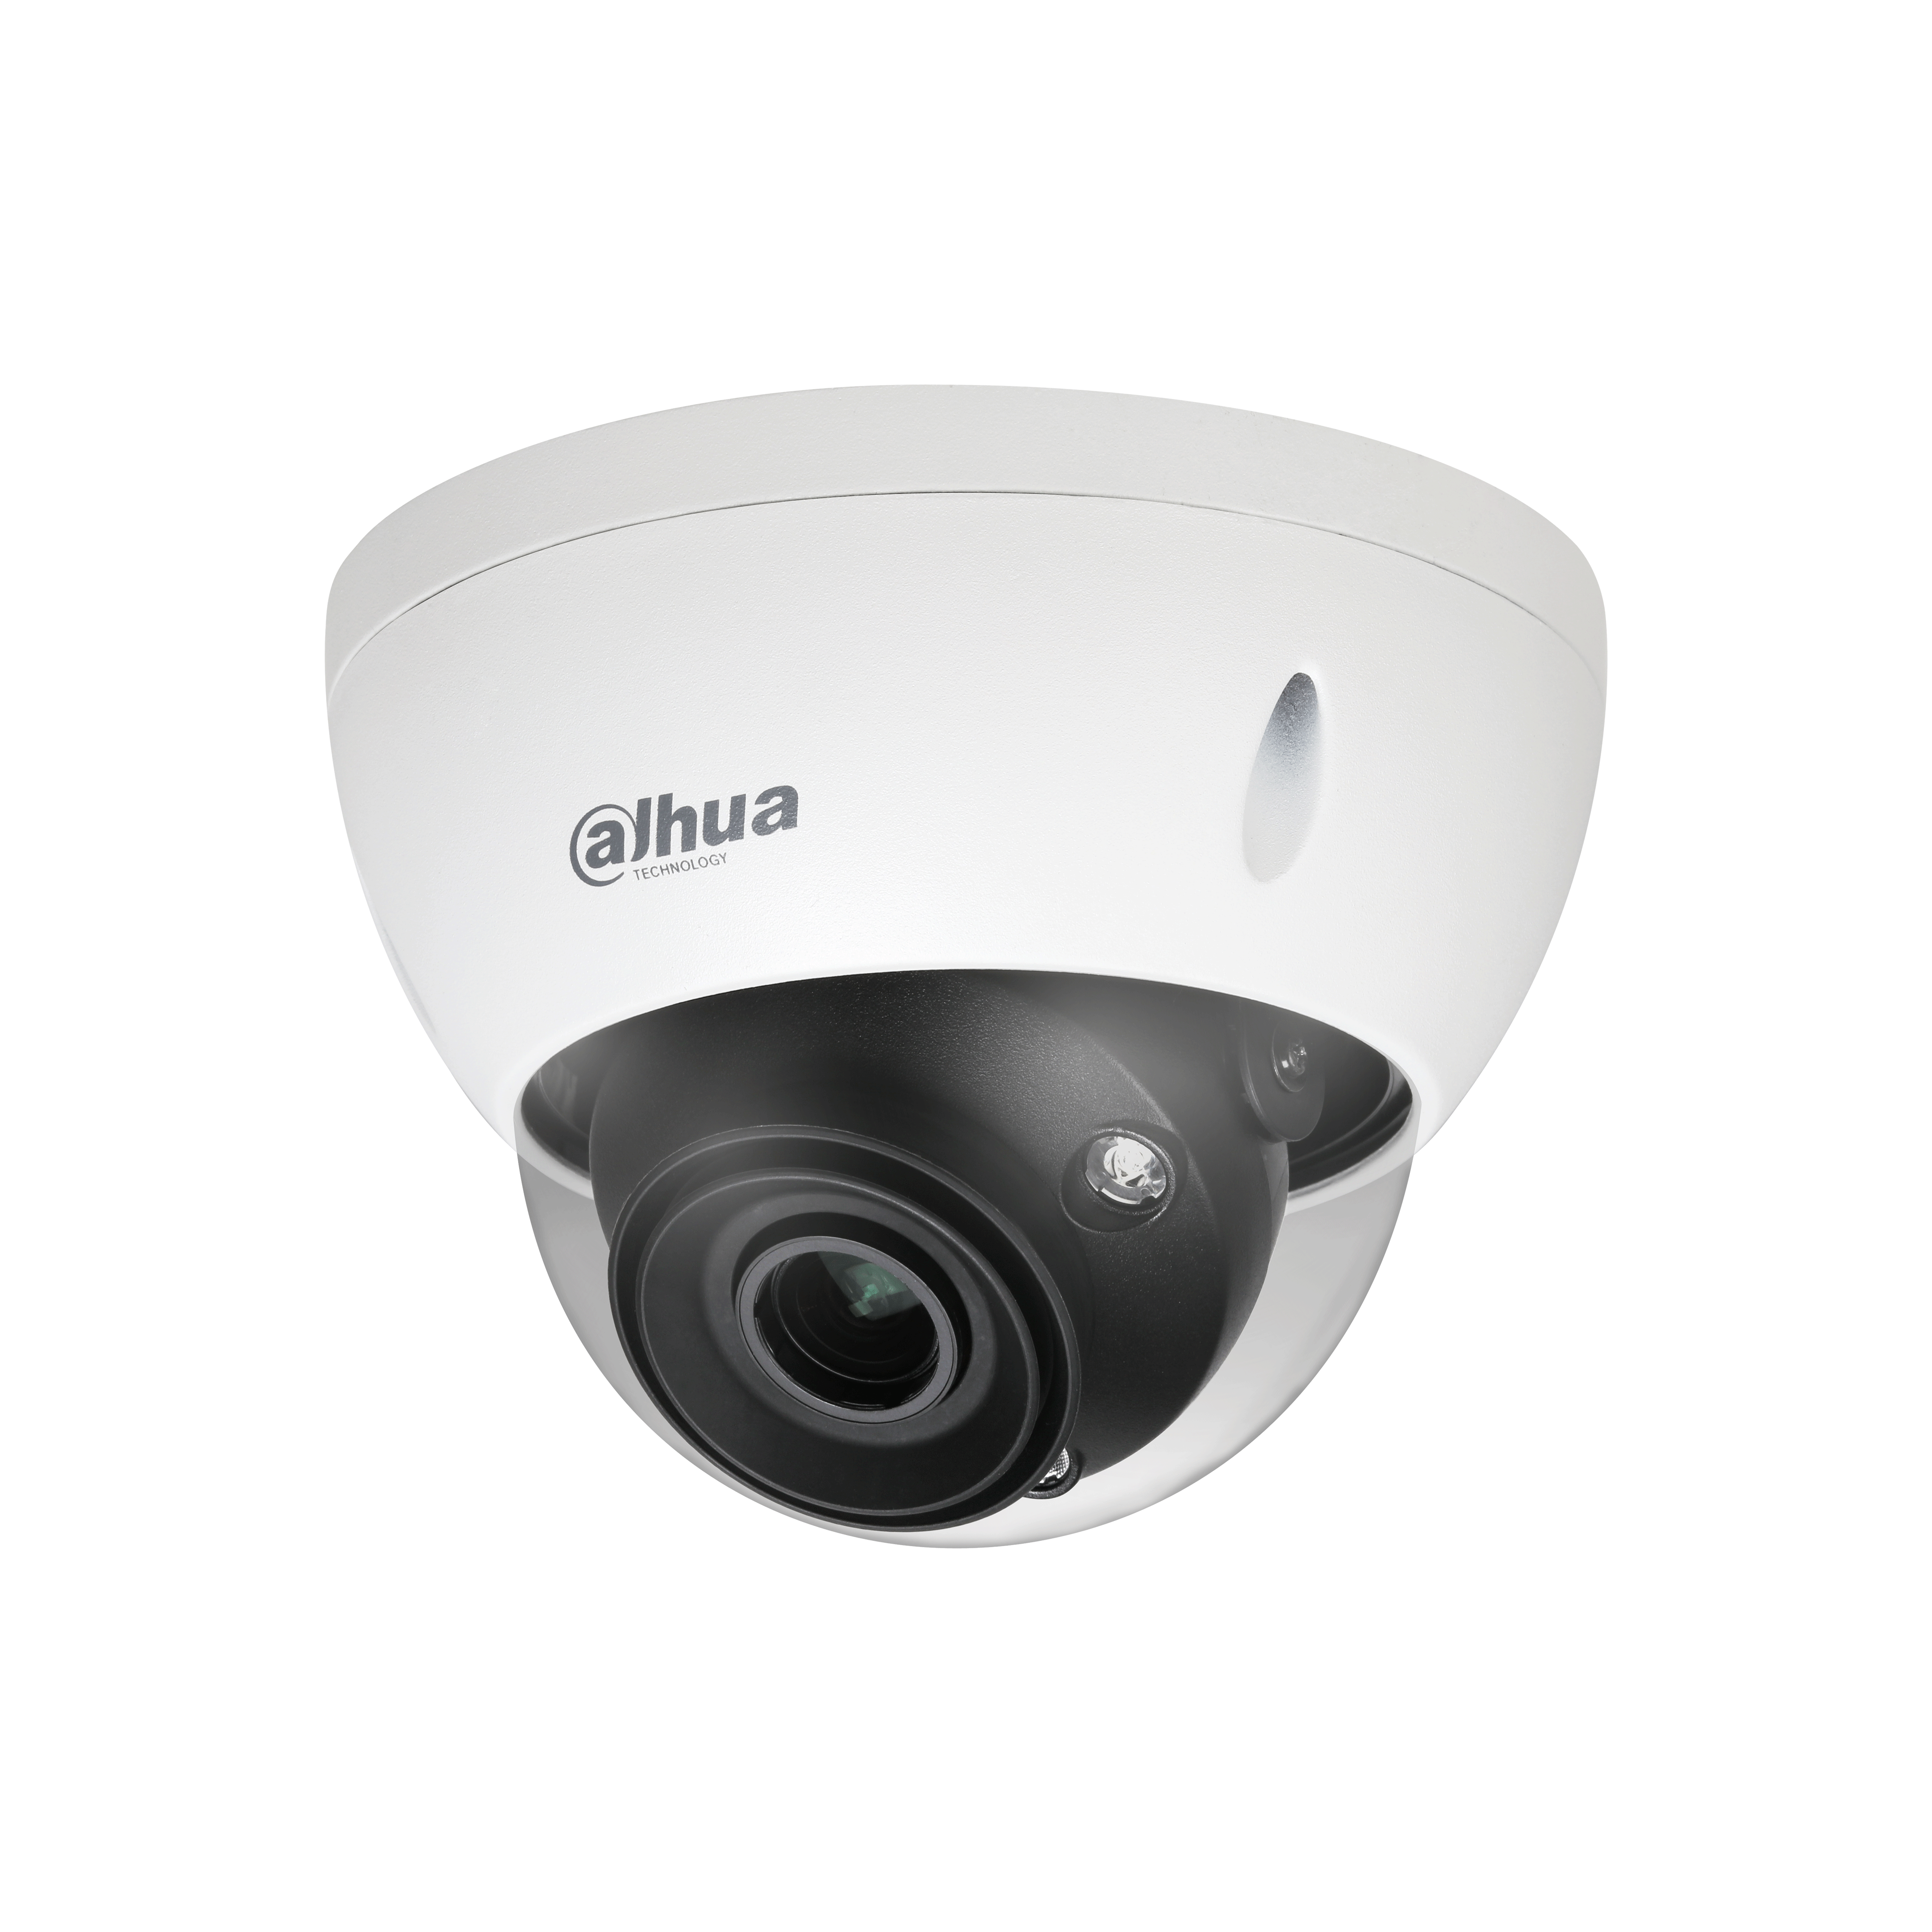 WIZMIND S SERIES IP CAMERA WHITE AI PEOPLE COUNT 5MP H.264/4+/5/5+ DOME 120 WDR METAL 2.7-13.5MM MOTORISED LENS 5X ZOOM DEEP LIGHT IR 40M EPOE IP67 BUILT IN MIC AUDIO IN AUDIO OUT 2 x ALARM IN 1 x ALARM OUT SUPPORT UP TO 512GB SDIK10 12VDC/24VAC